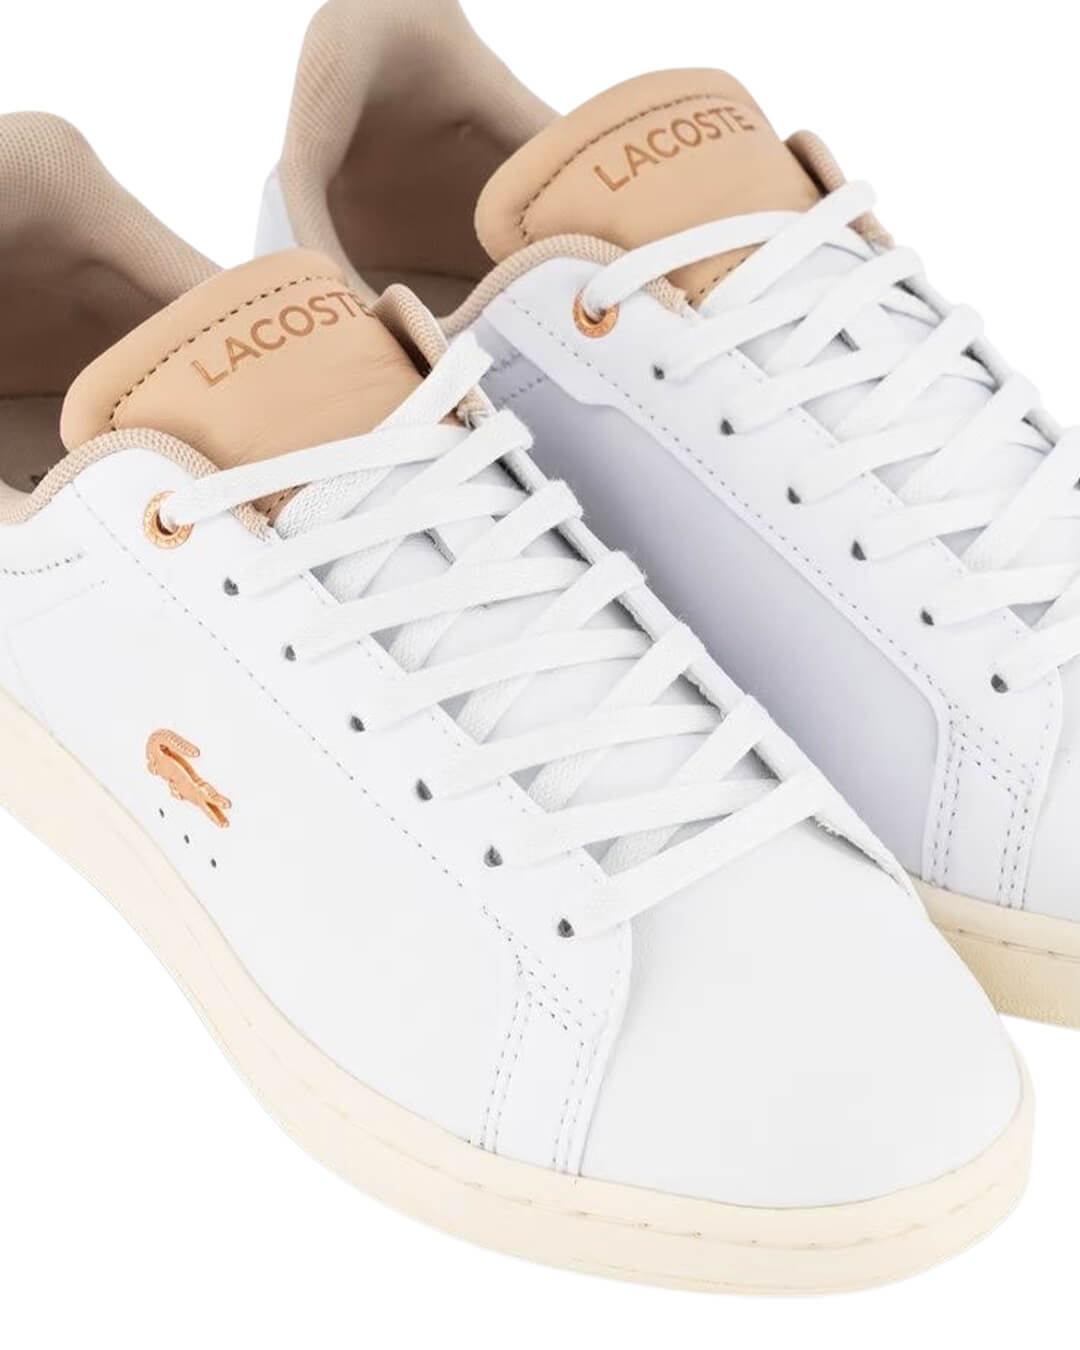 Lacoste Shoes Lacoste Carnaby Pro Leather White And Beige Sneakers